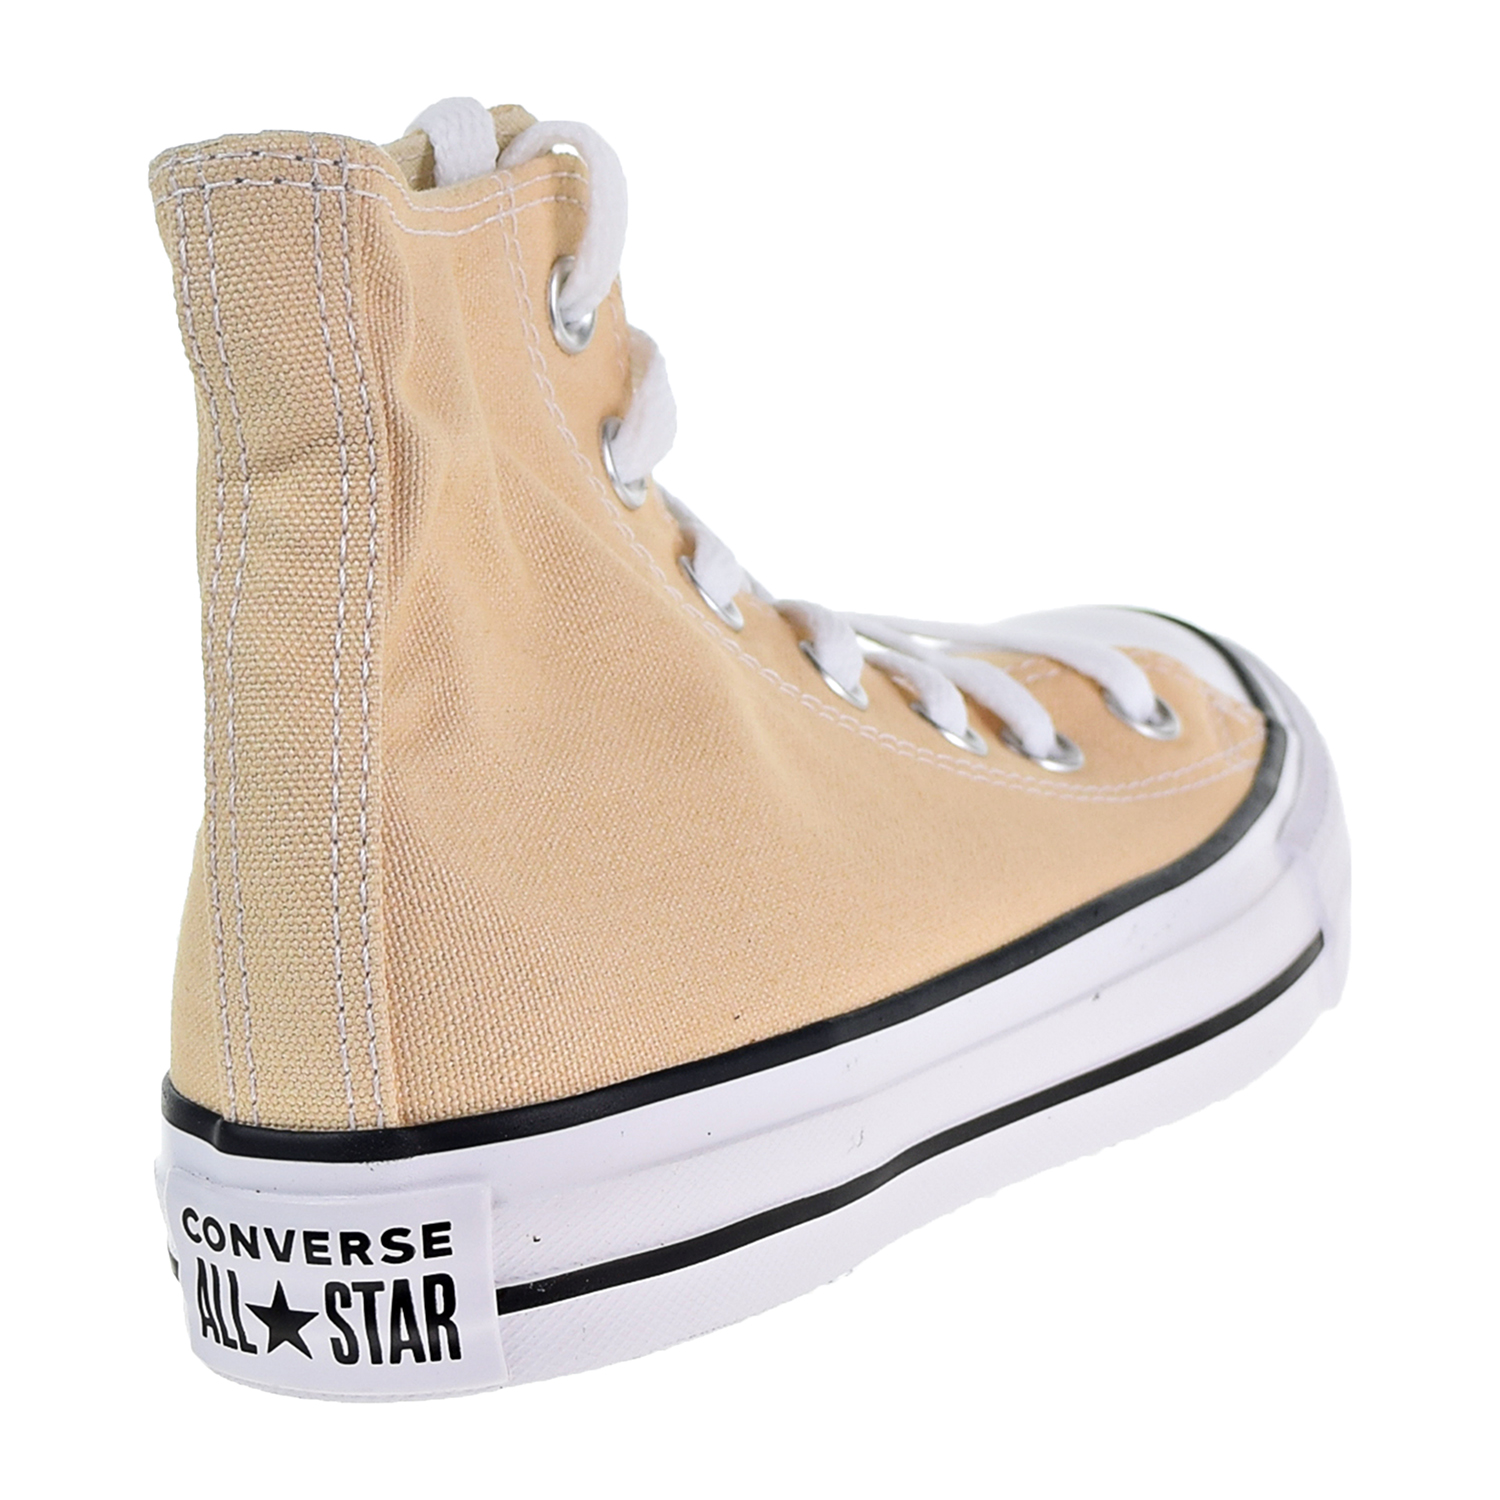 Converse Chuck Taylor All Star Hi Men's/Big Kids' Shoes Raw Ginger 160456f - image 3 of 6